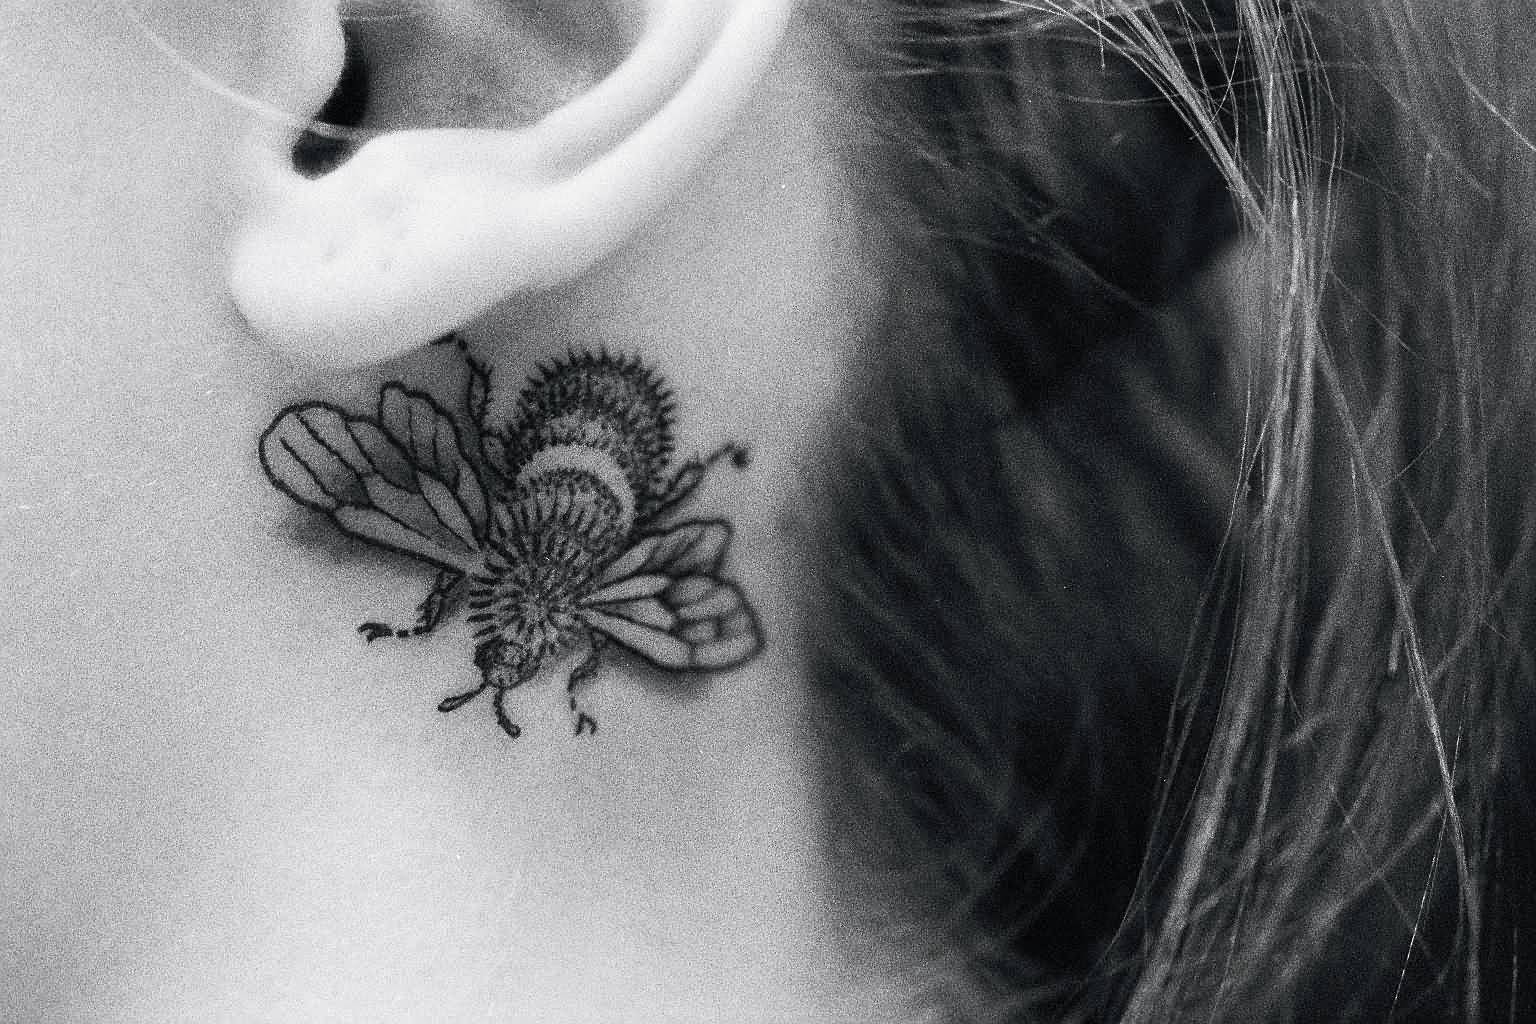 Dotwork Bumblebee Tattoo On Left Behind The Ear